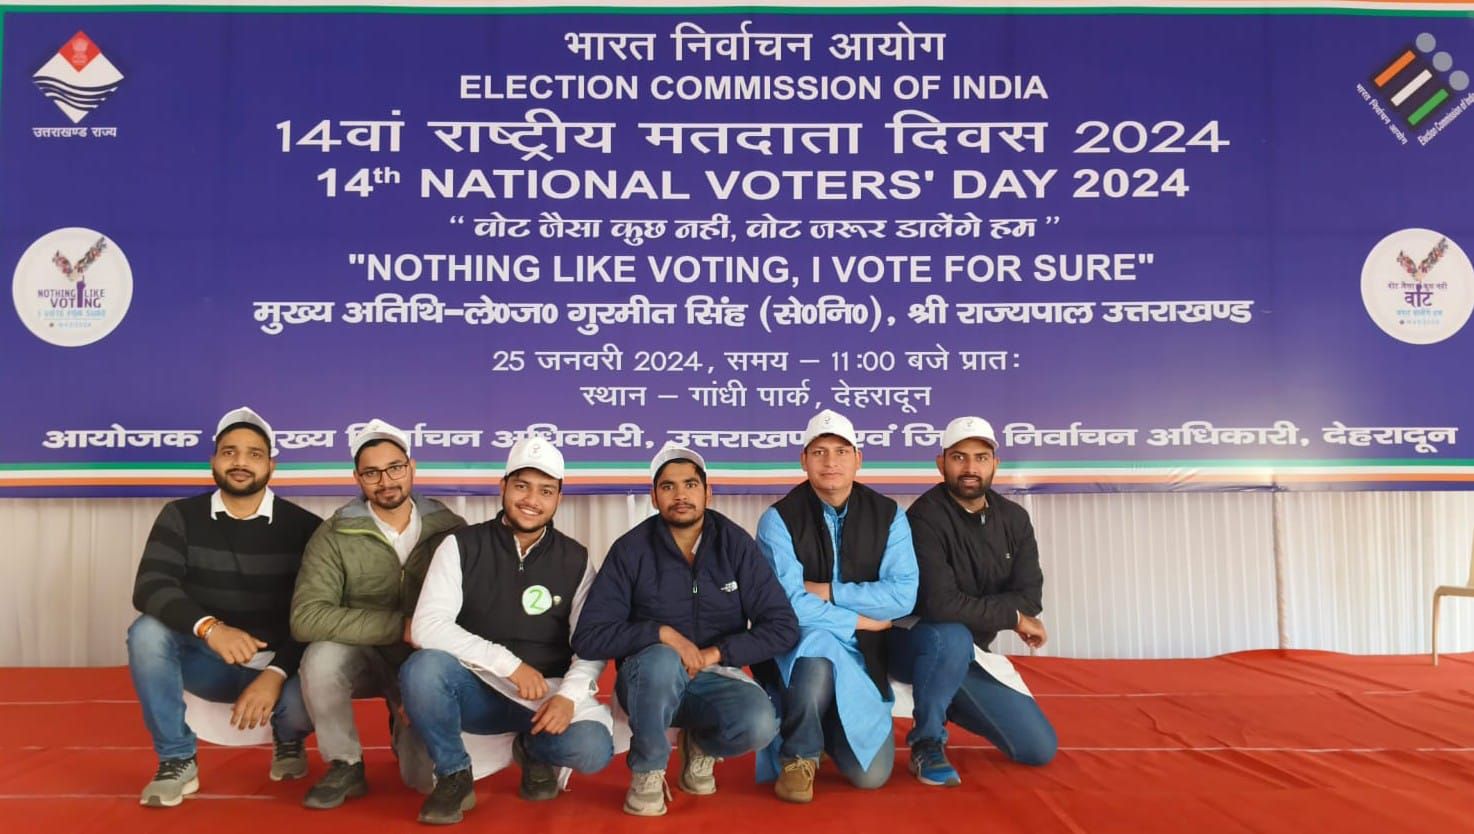 NATIONAL VOTER'S DAY 2024